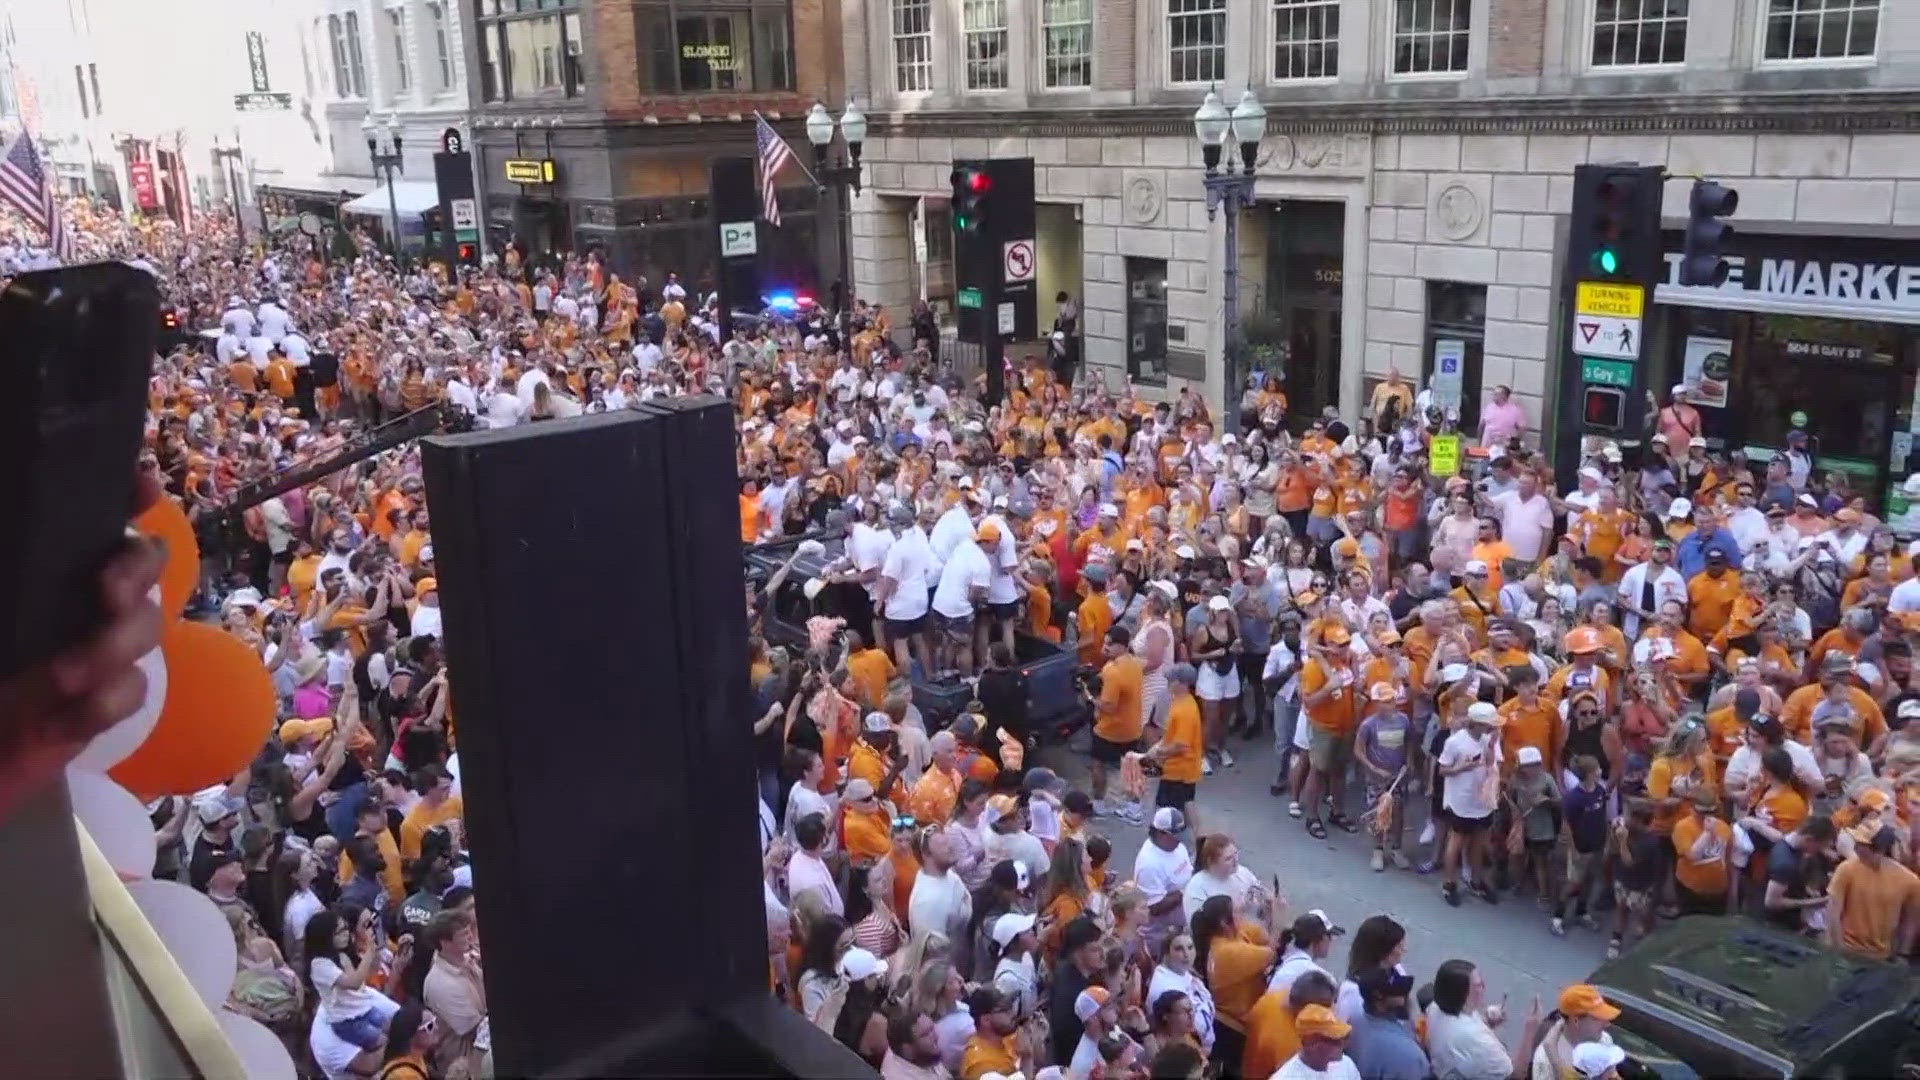 The Vols took home a national title, winning in the College World Series.